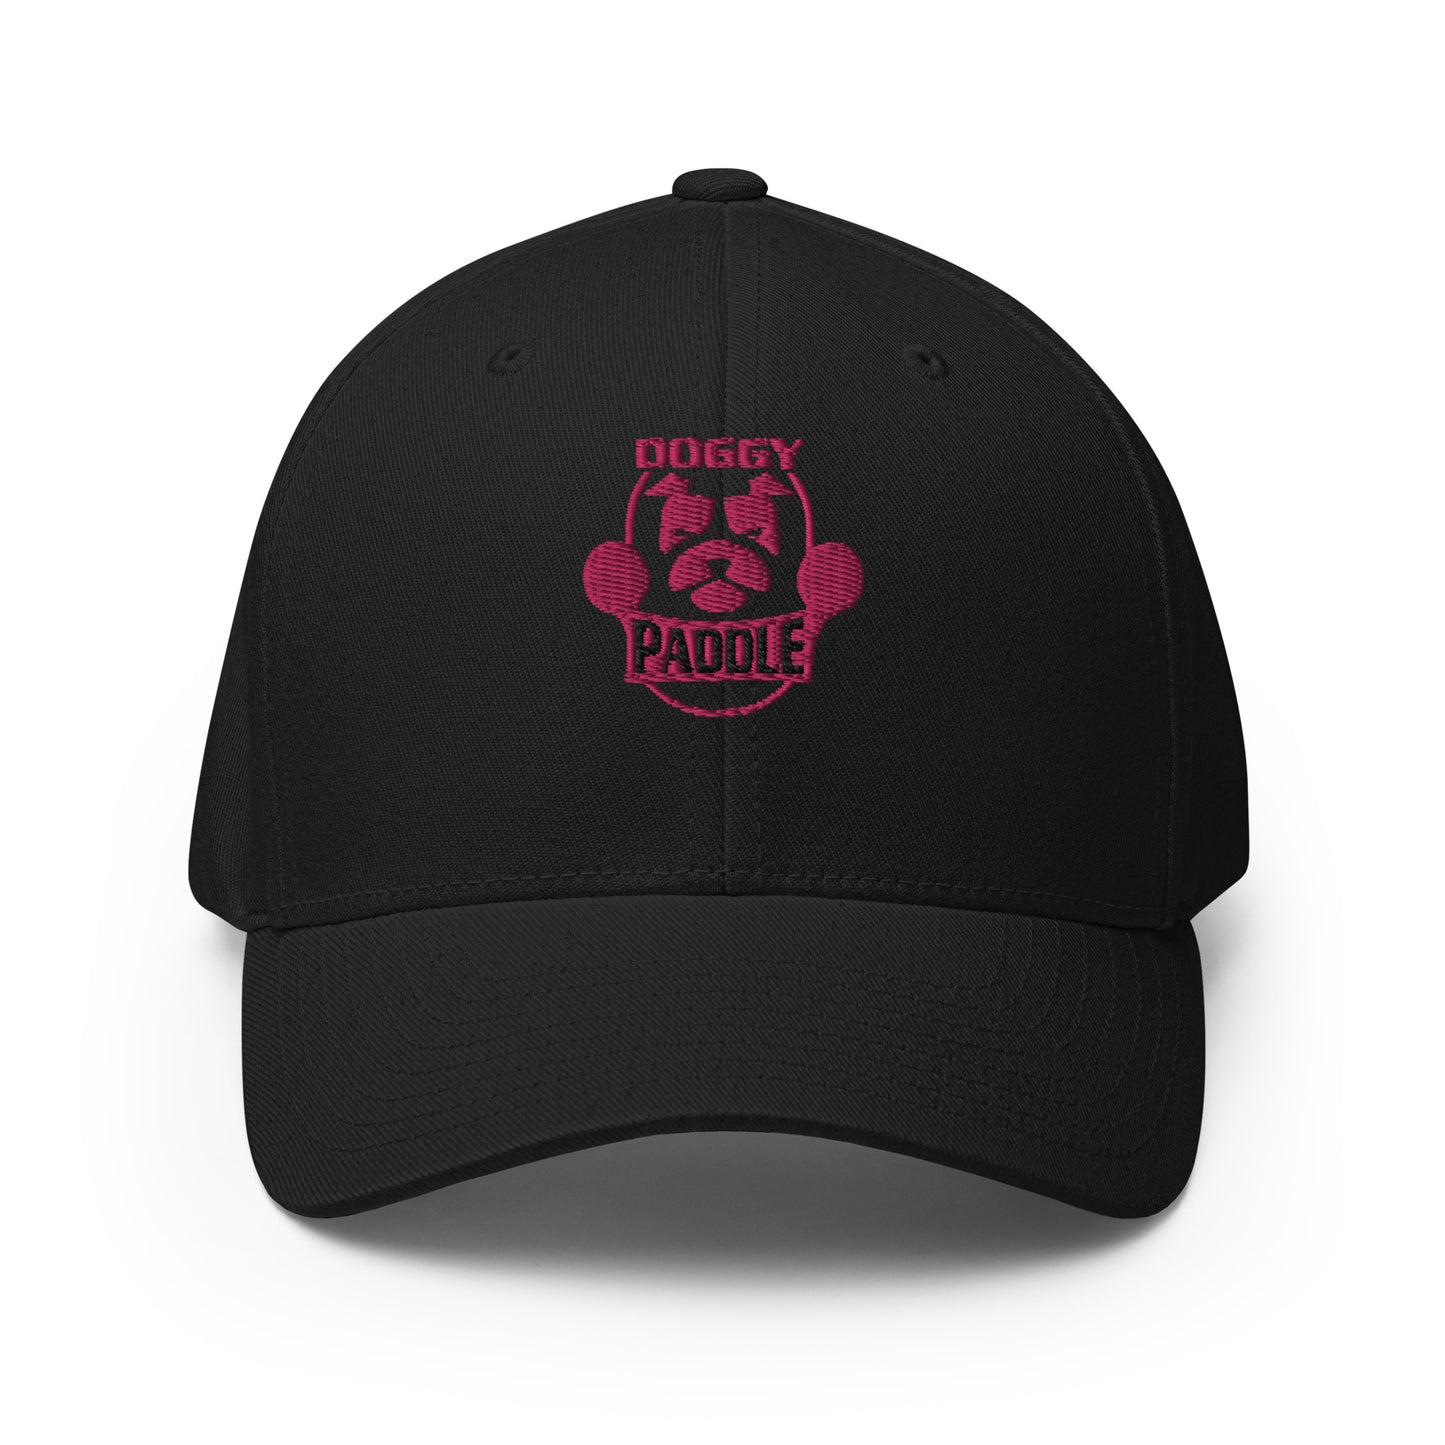 Doggy Paddle Pink Stretch Fit Hat